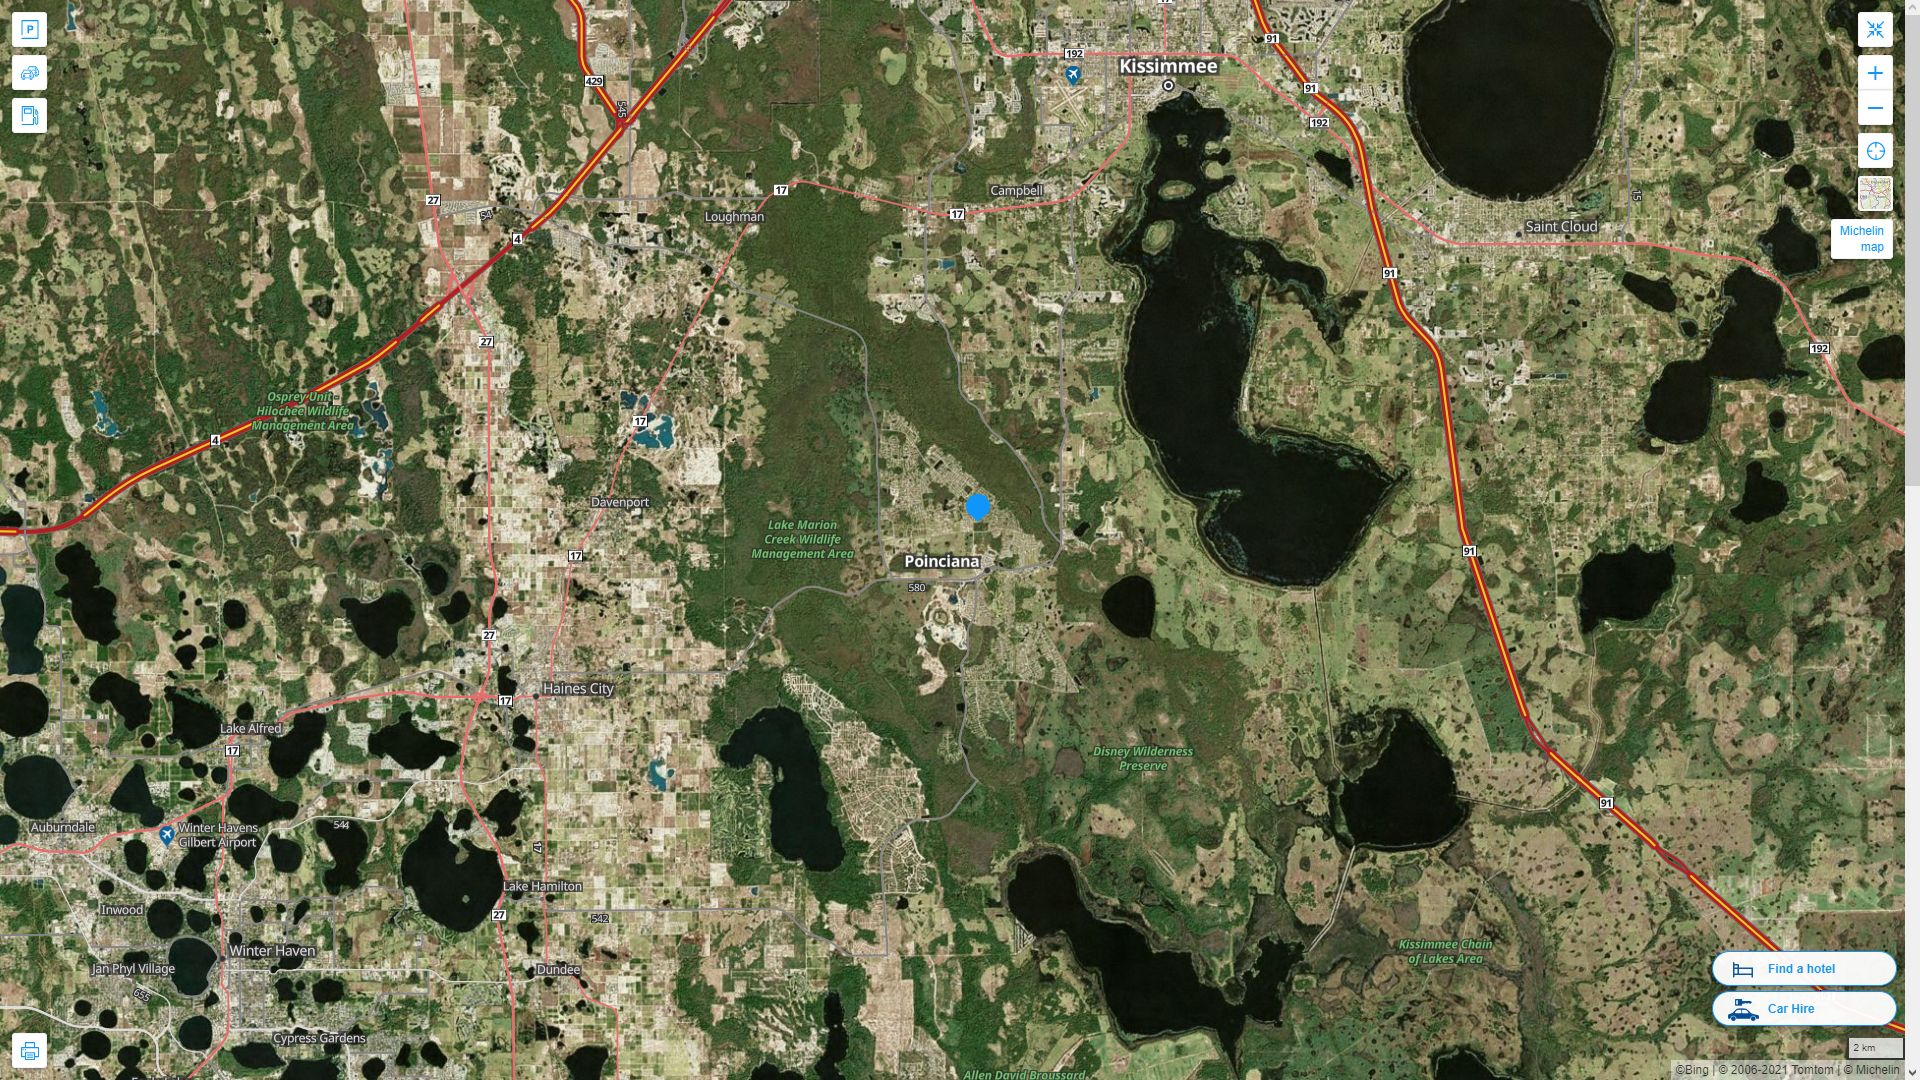 Poinciana Florida Highway and Road Map with Satellite View